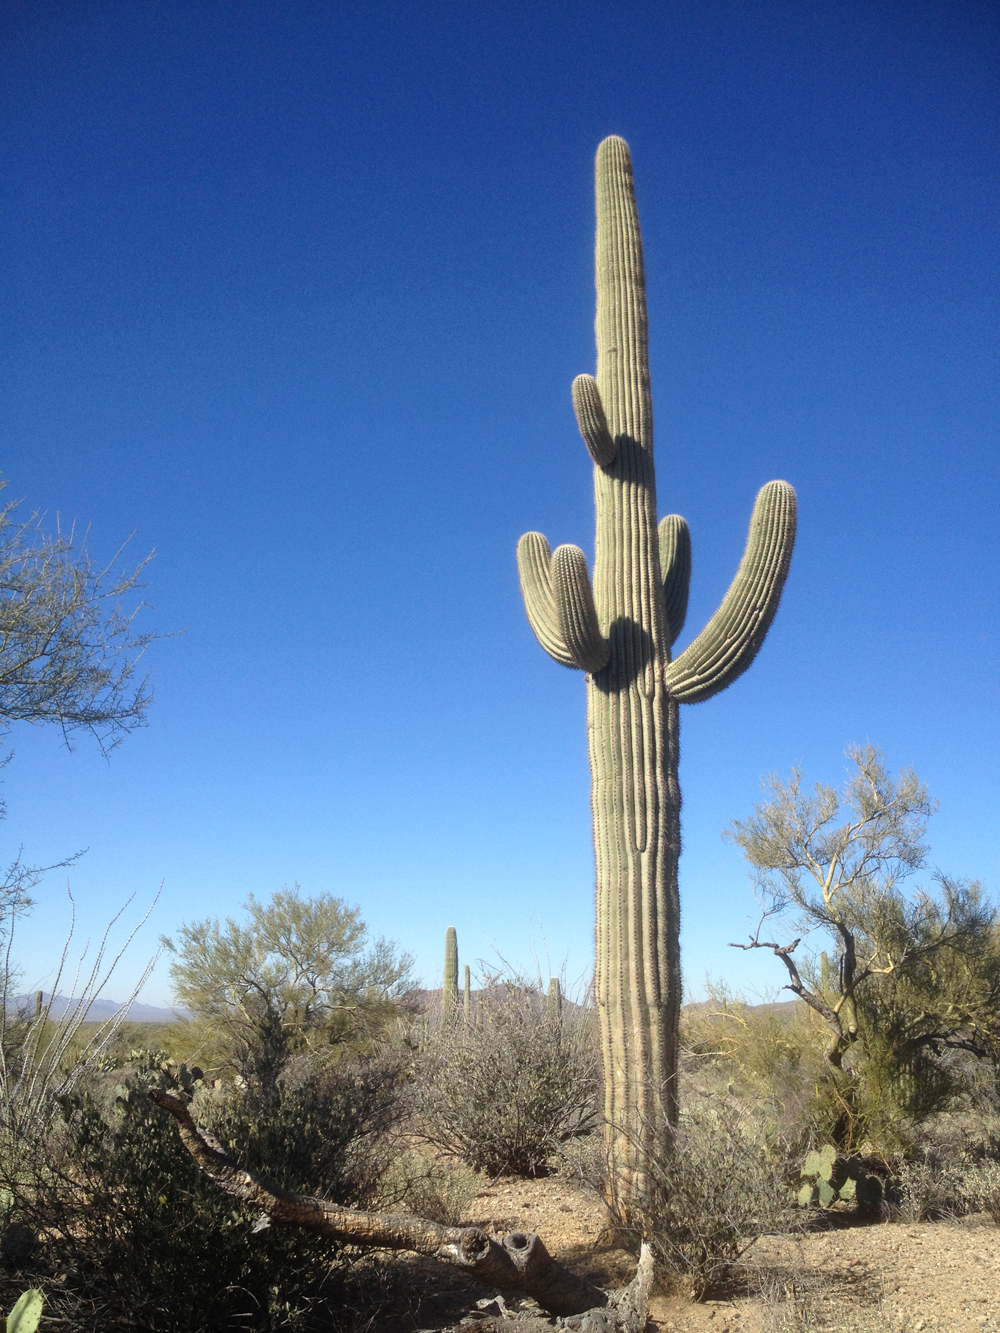 Saguaros whistle in the wind